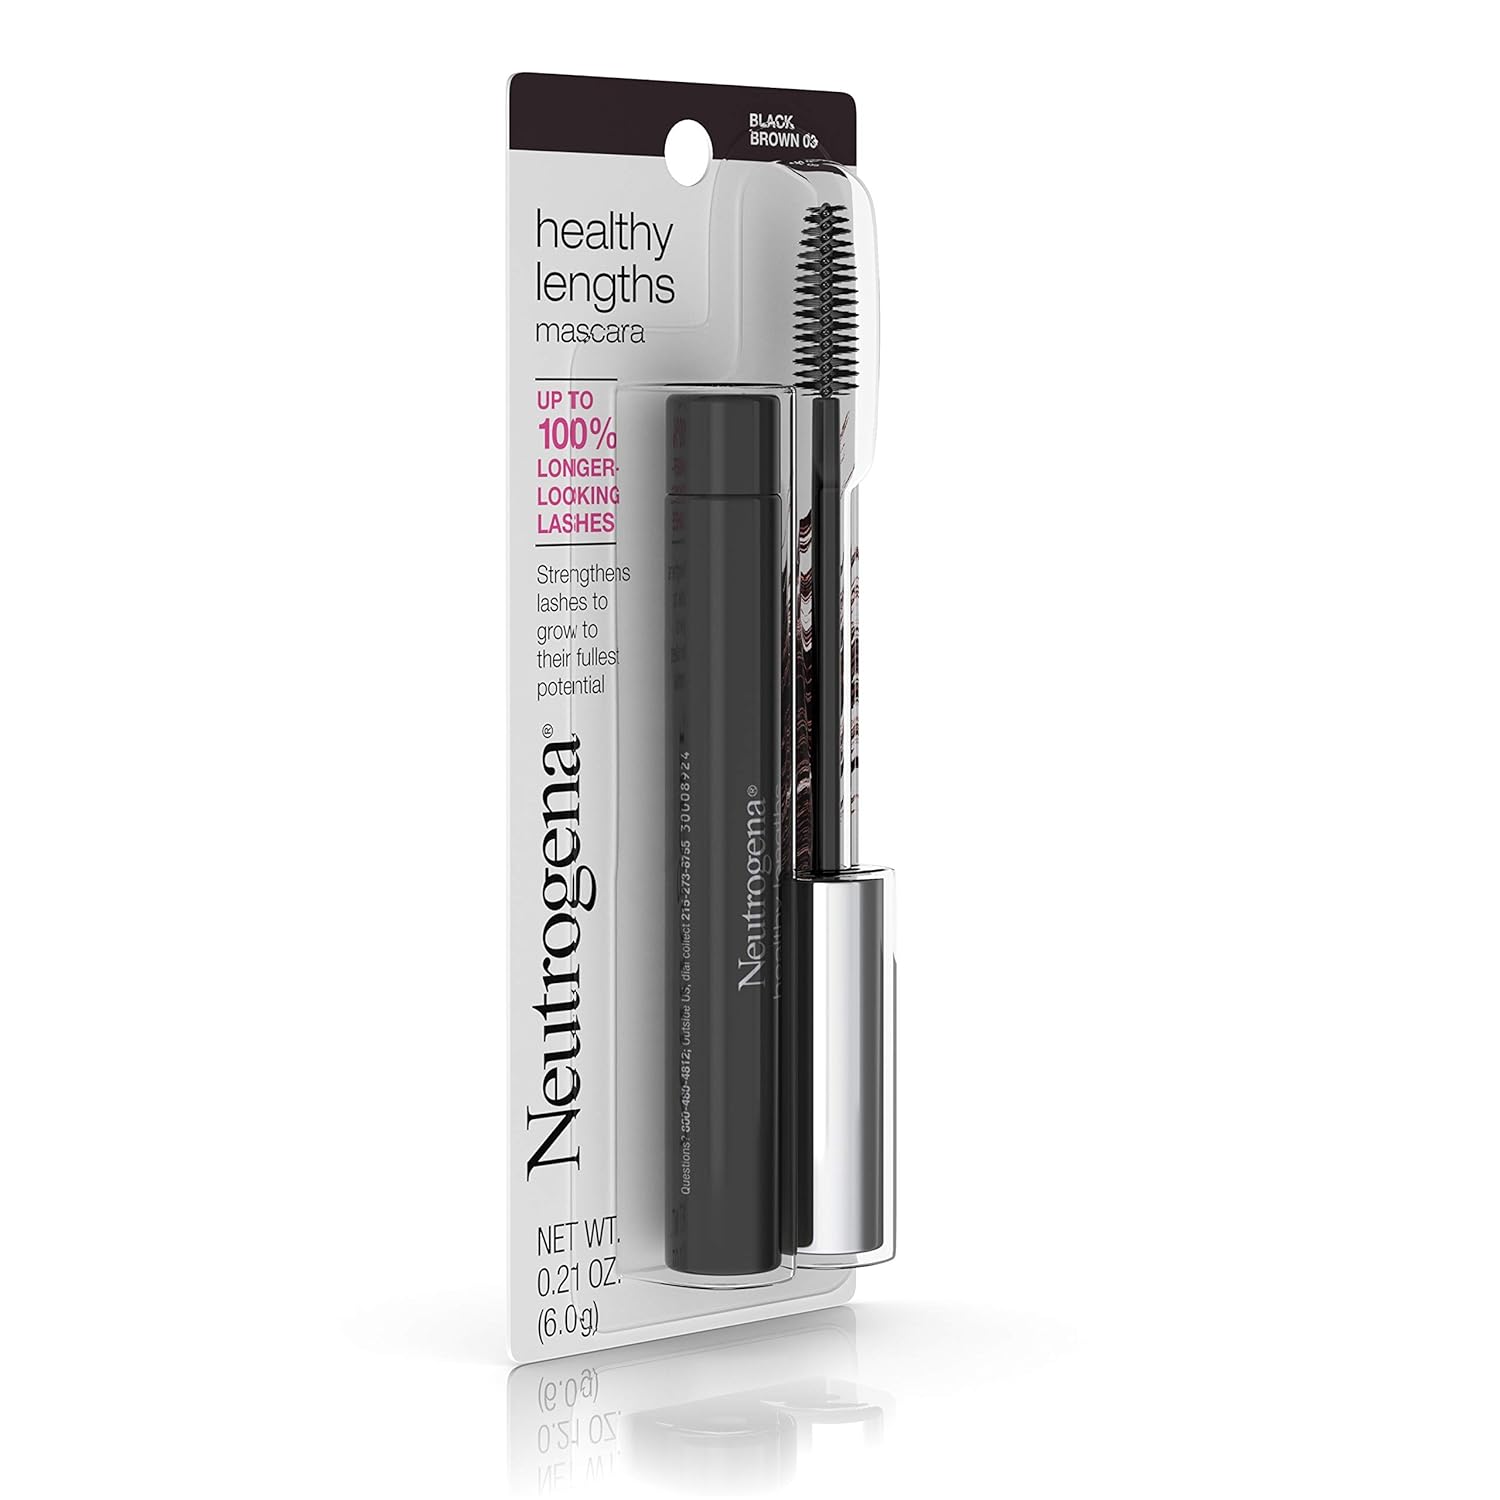 Neutrogena Healthy Lengths Mascara for Stronger, Longer Lashes, Clump-, Smudge- and Flake-Free Mascara with Olive Oil, Vitamin E and Rice Protein, Black/Brown 03,.21 oz : Beauty & Personal Care